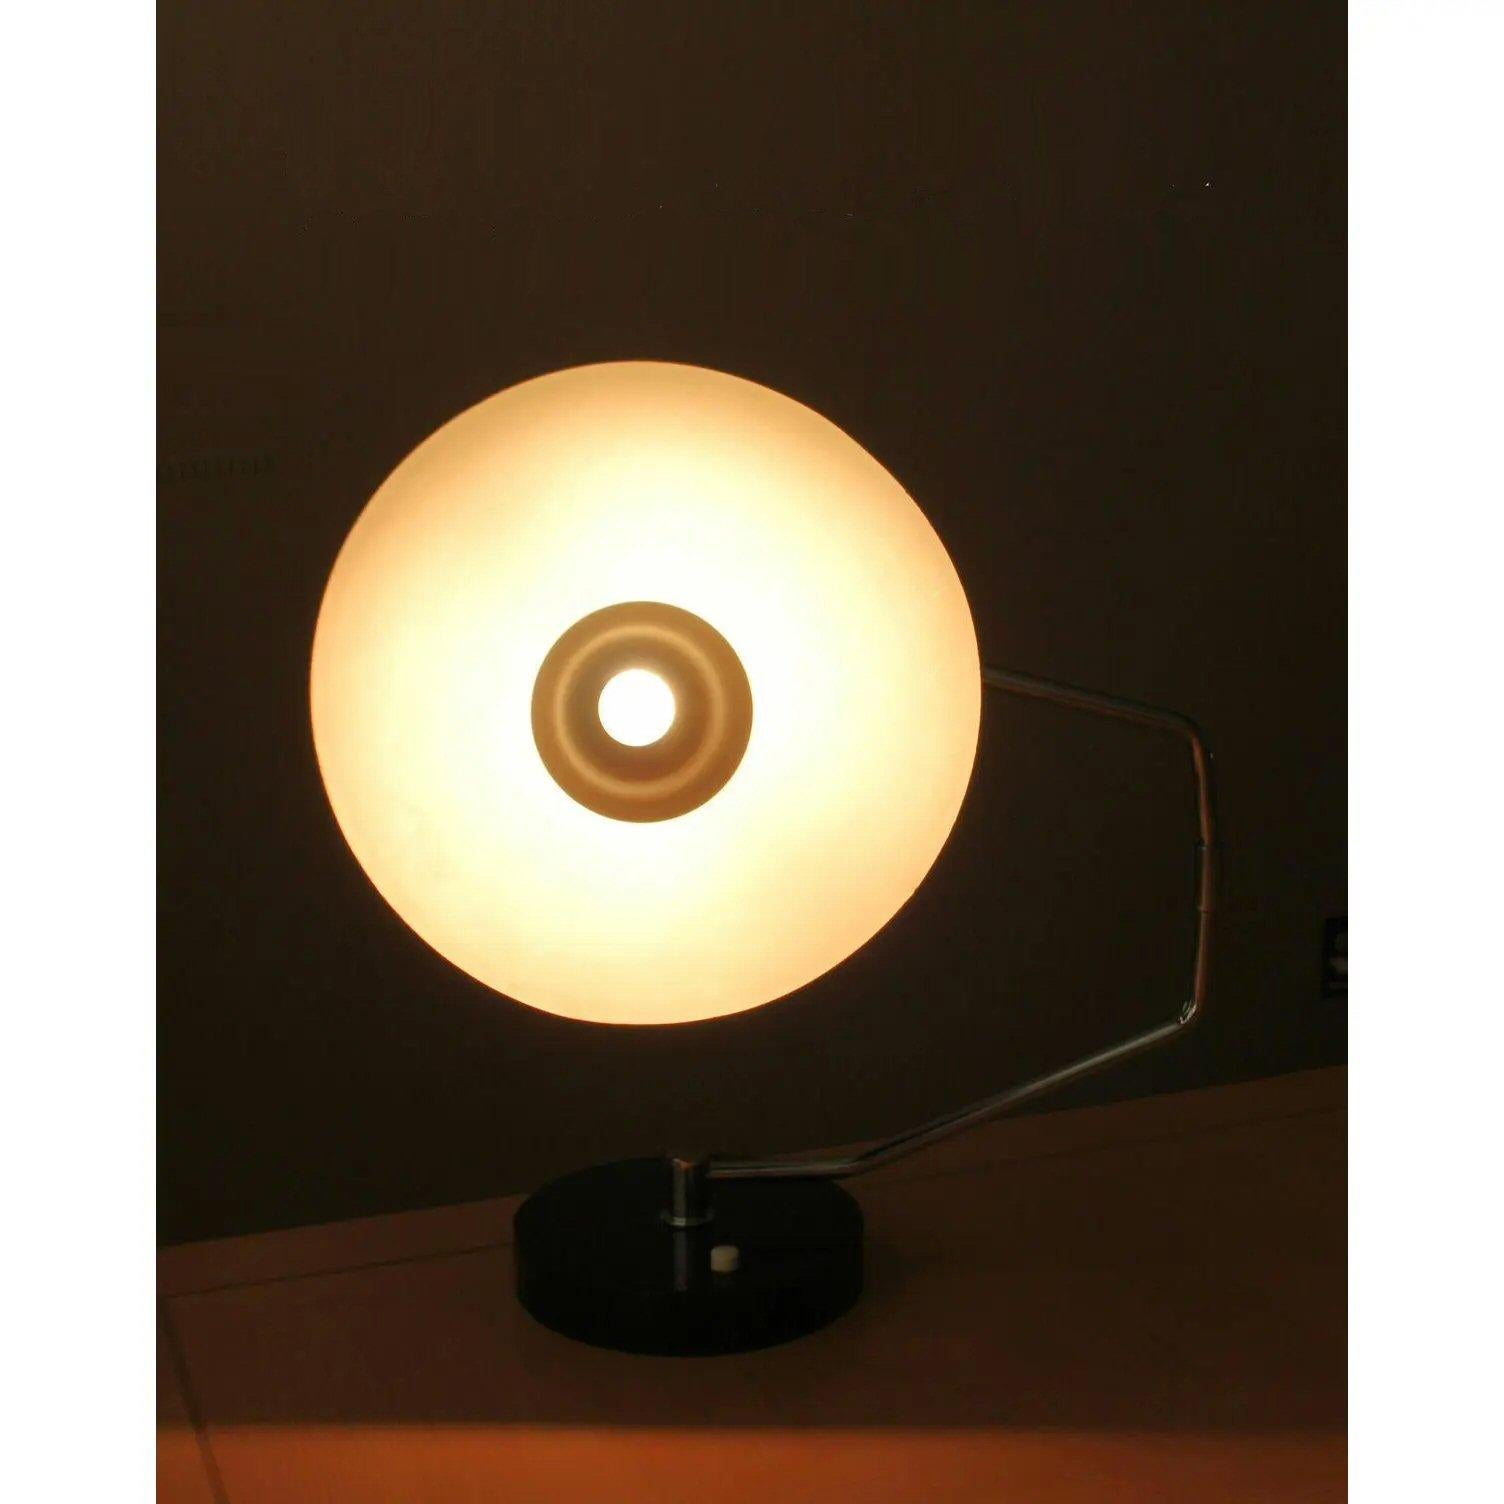 20th Century Clay Michie For Knoll Swing Arm Saucer Desk Lamp, 1950s Mid Century Good Design For Sale